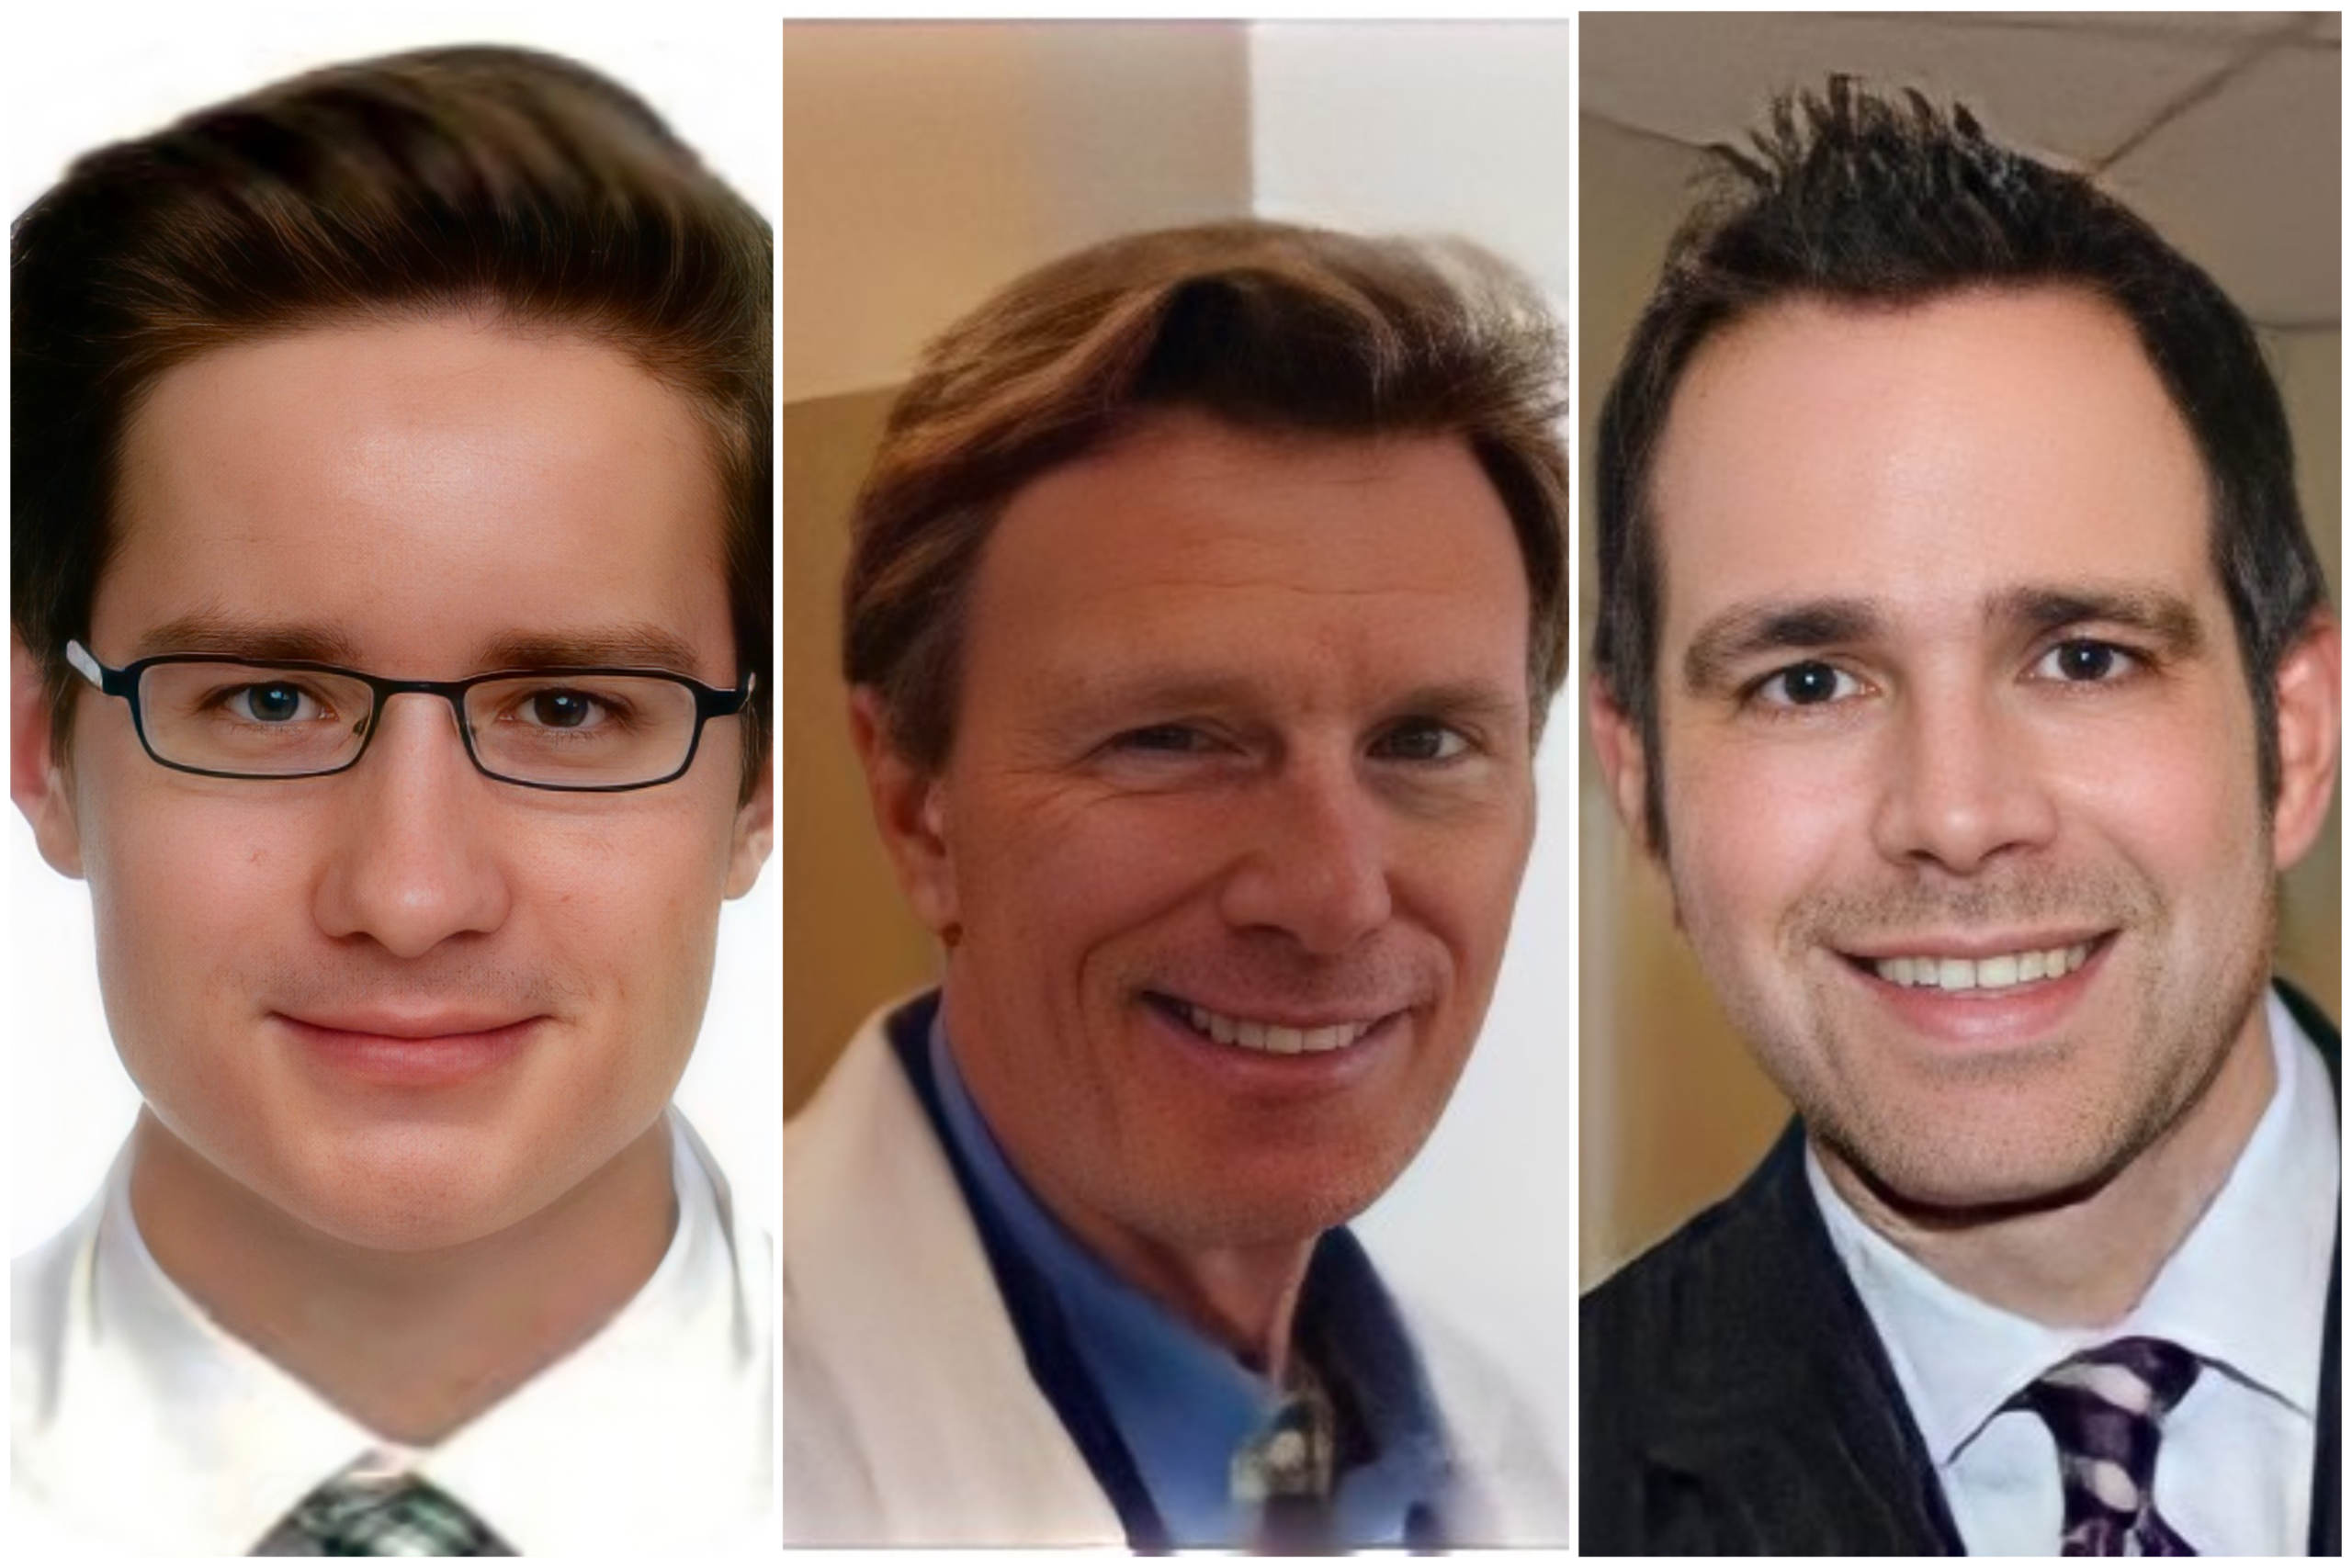 THREE DOCTORS From the Same Hospital “Die Suddenly” in the Same Week After Hospital Mandates Fourth COVID Shot